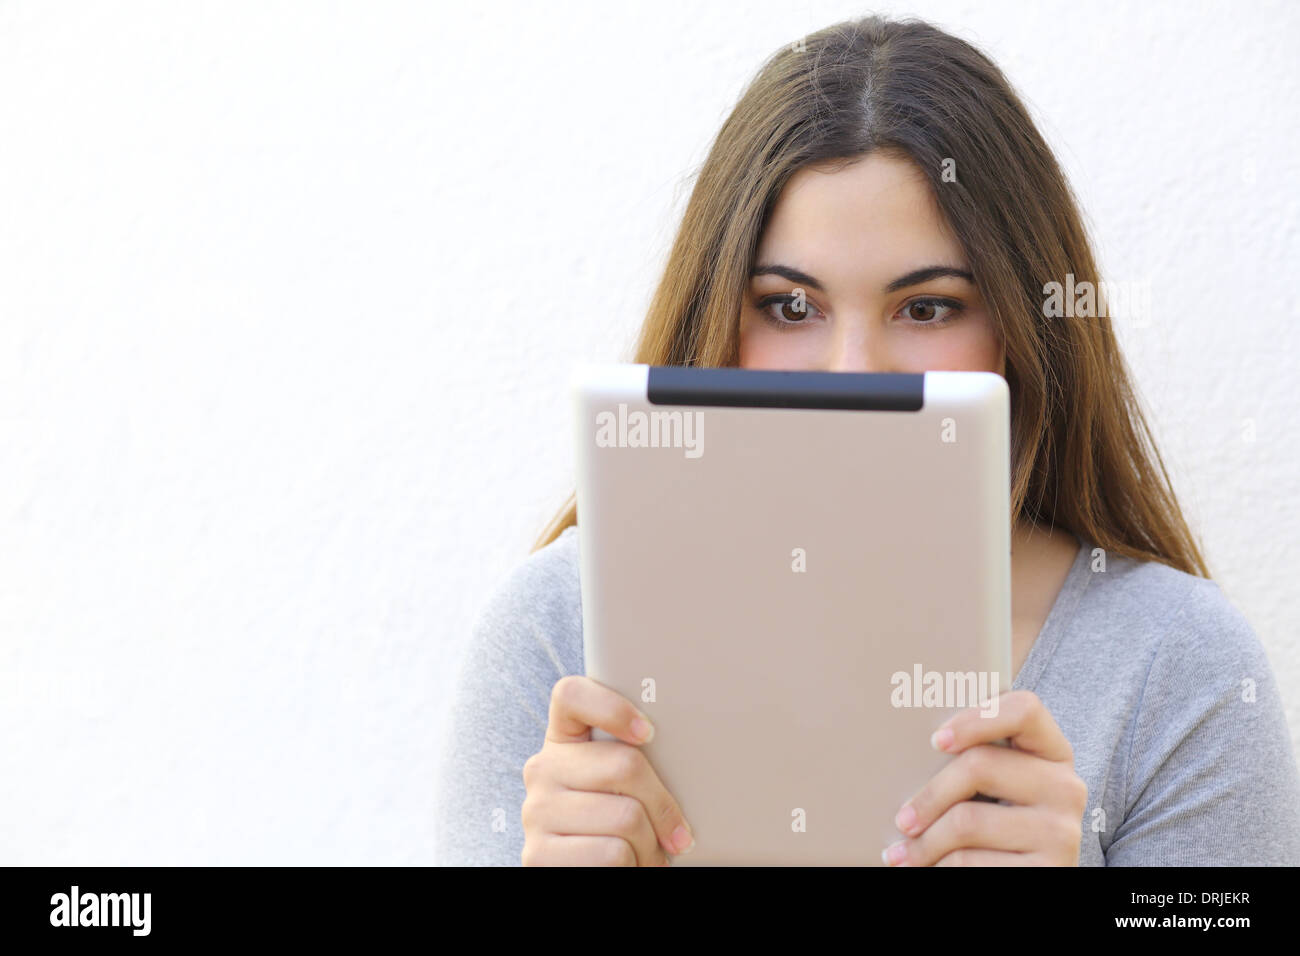 Internet addiction woman reading a tablet reader on a white wall background Stock Photo